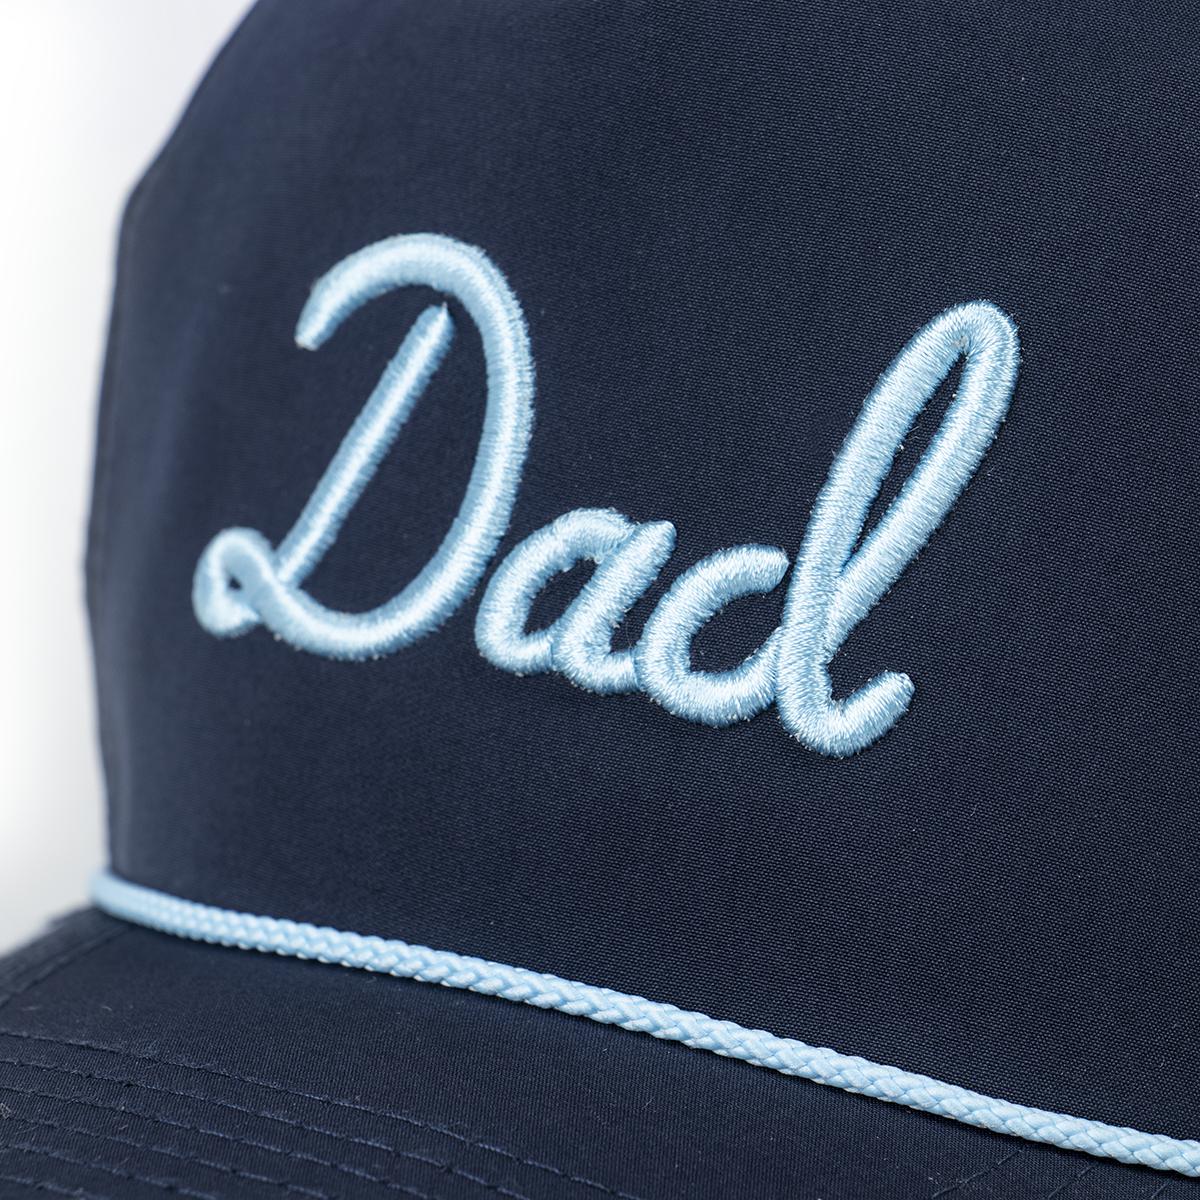 Dad Imperial Rope Hat-Hats-Bussin With The Boys-Barstool Sports